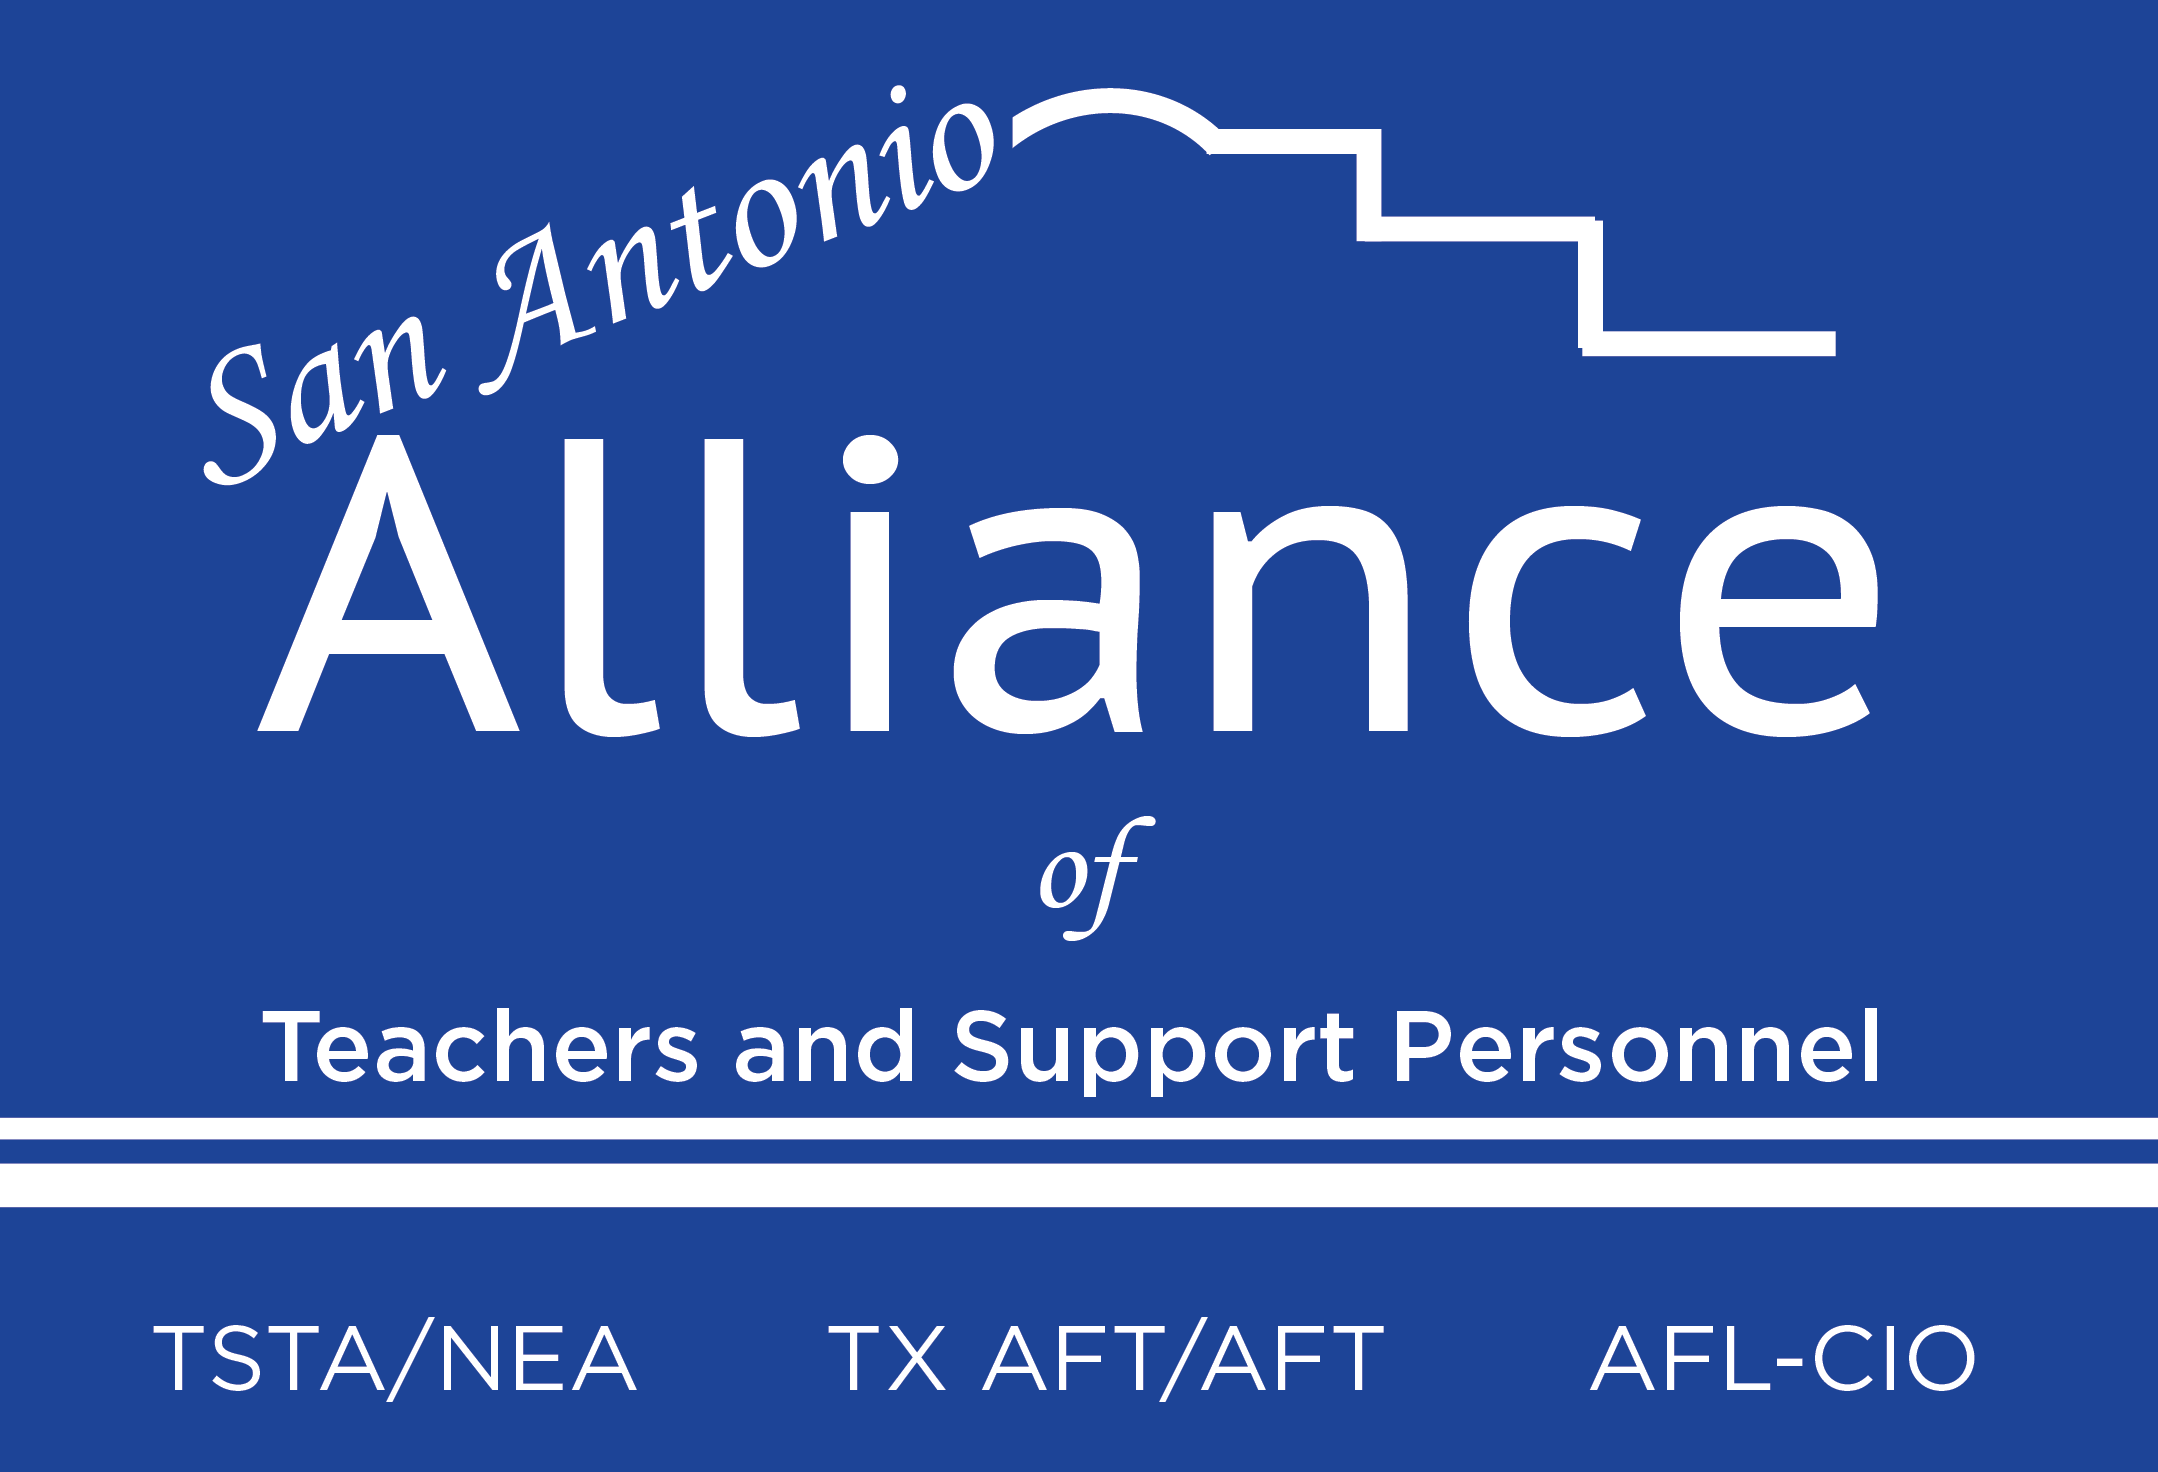 San Antonio Alliance of Teachers and Support Personnel logo